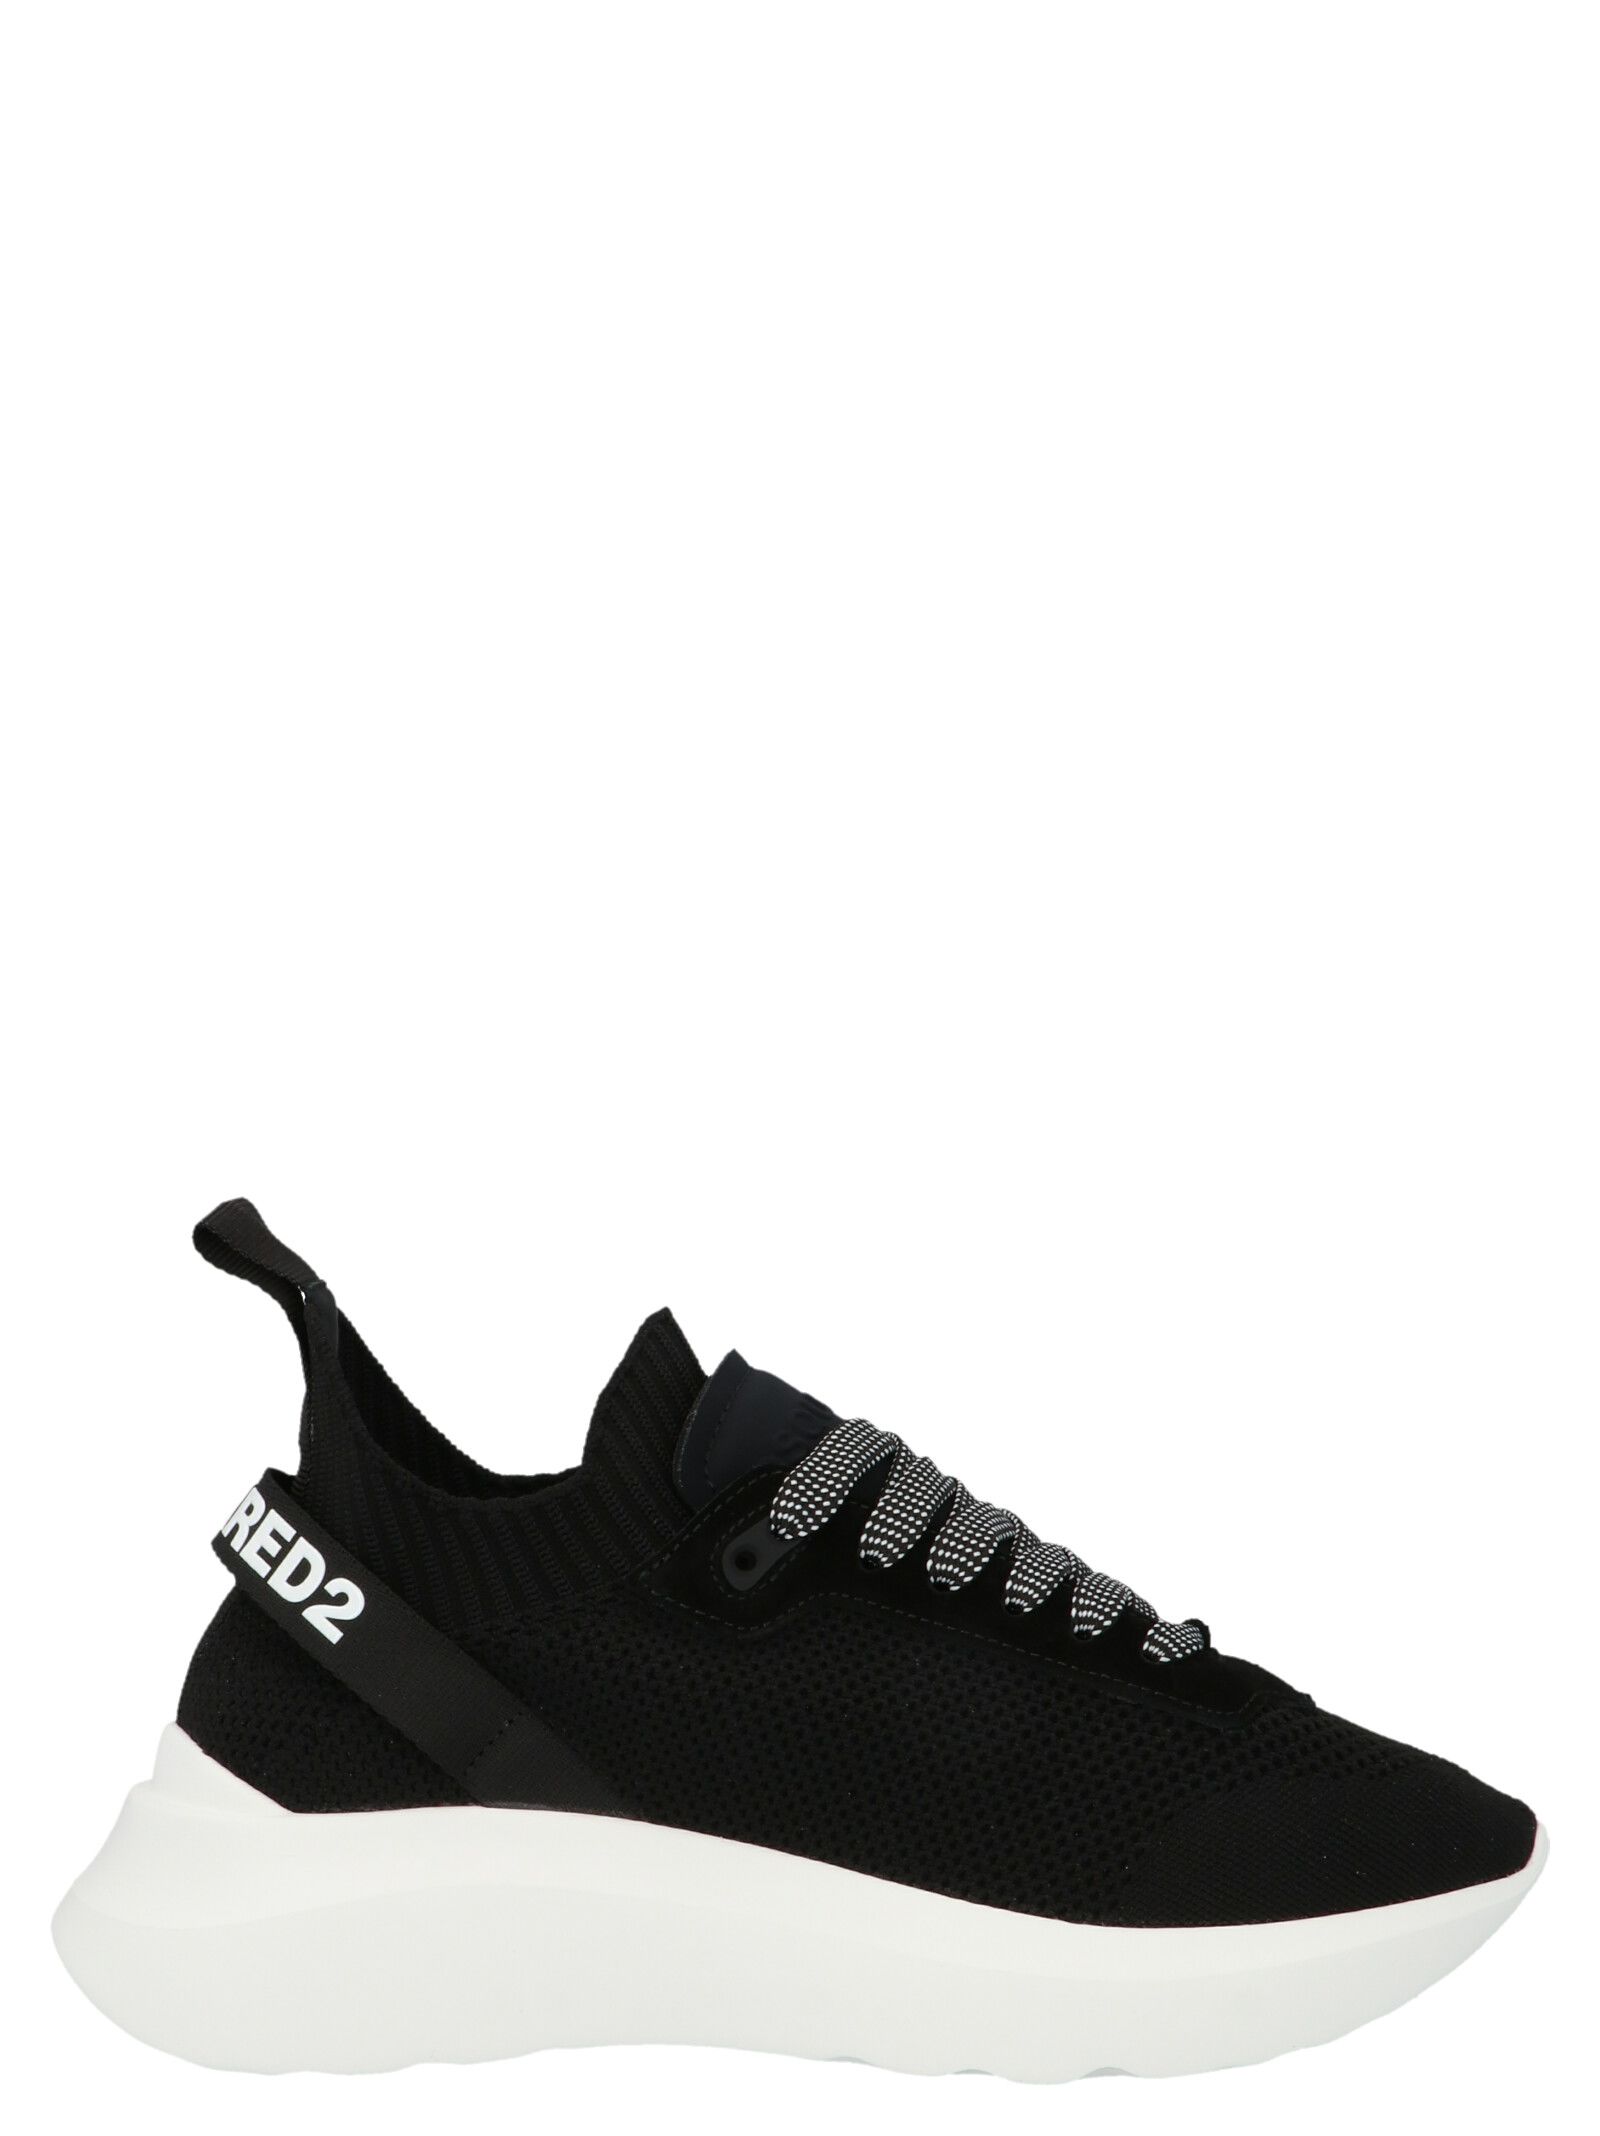 dsquared2 sneakers price